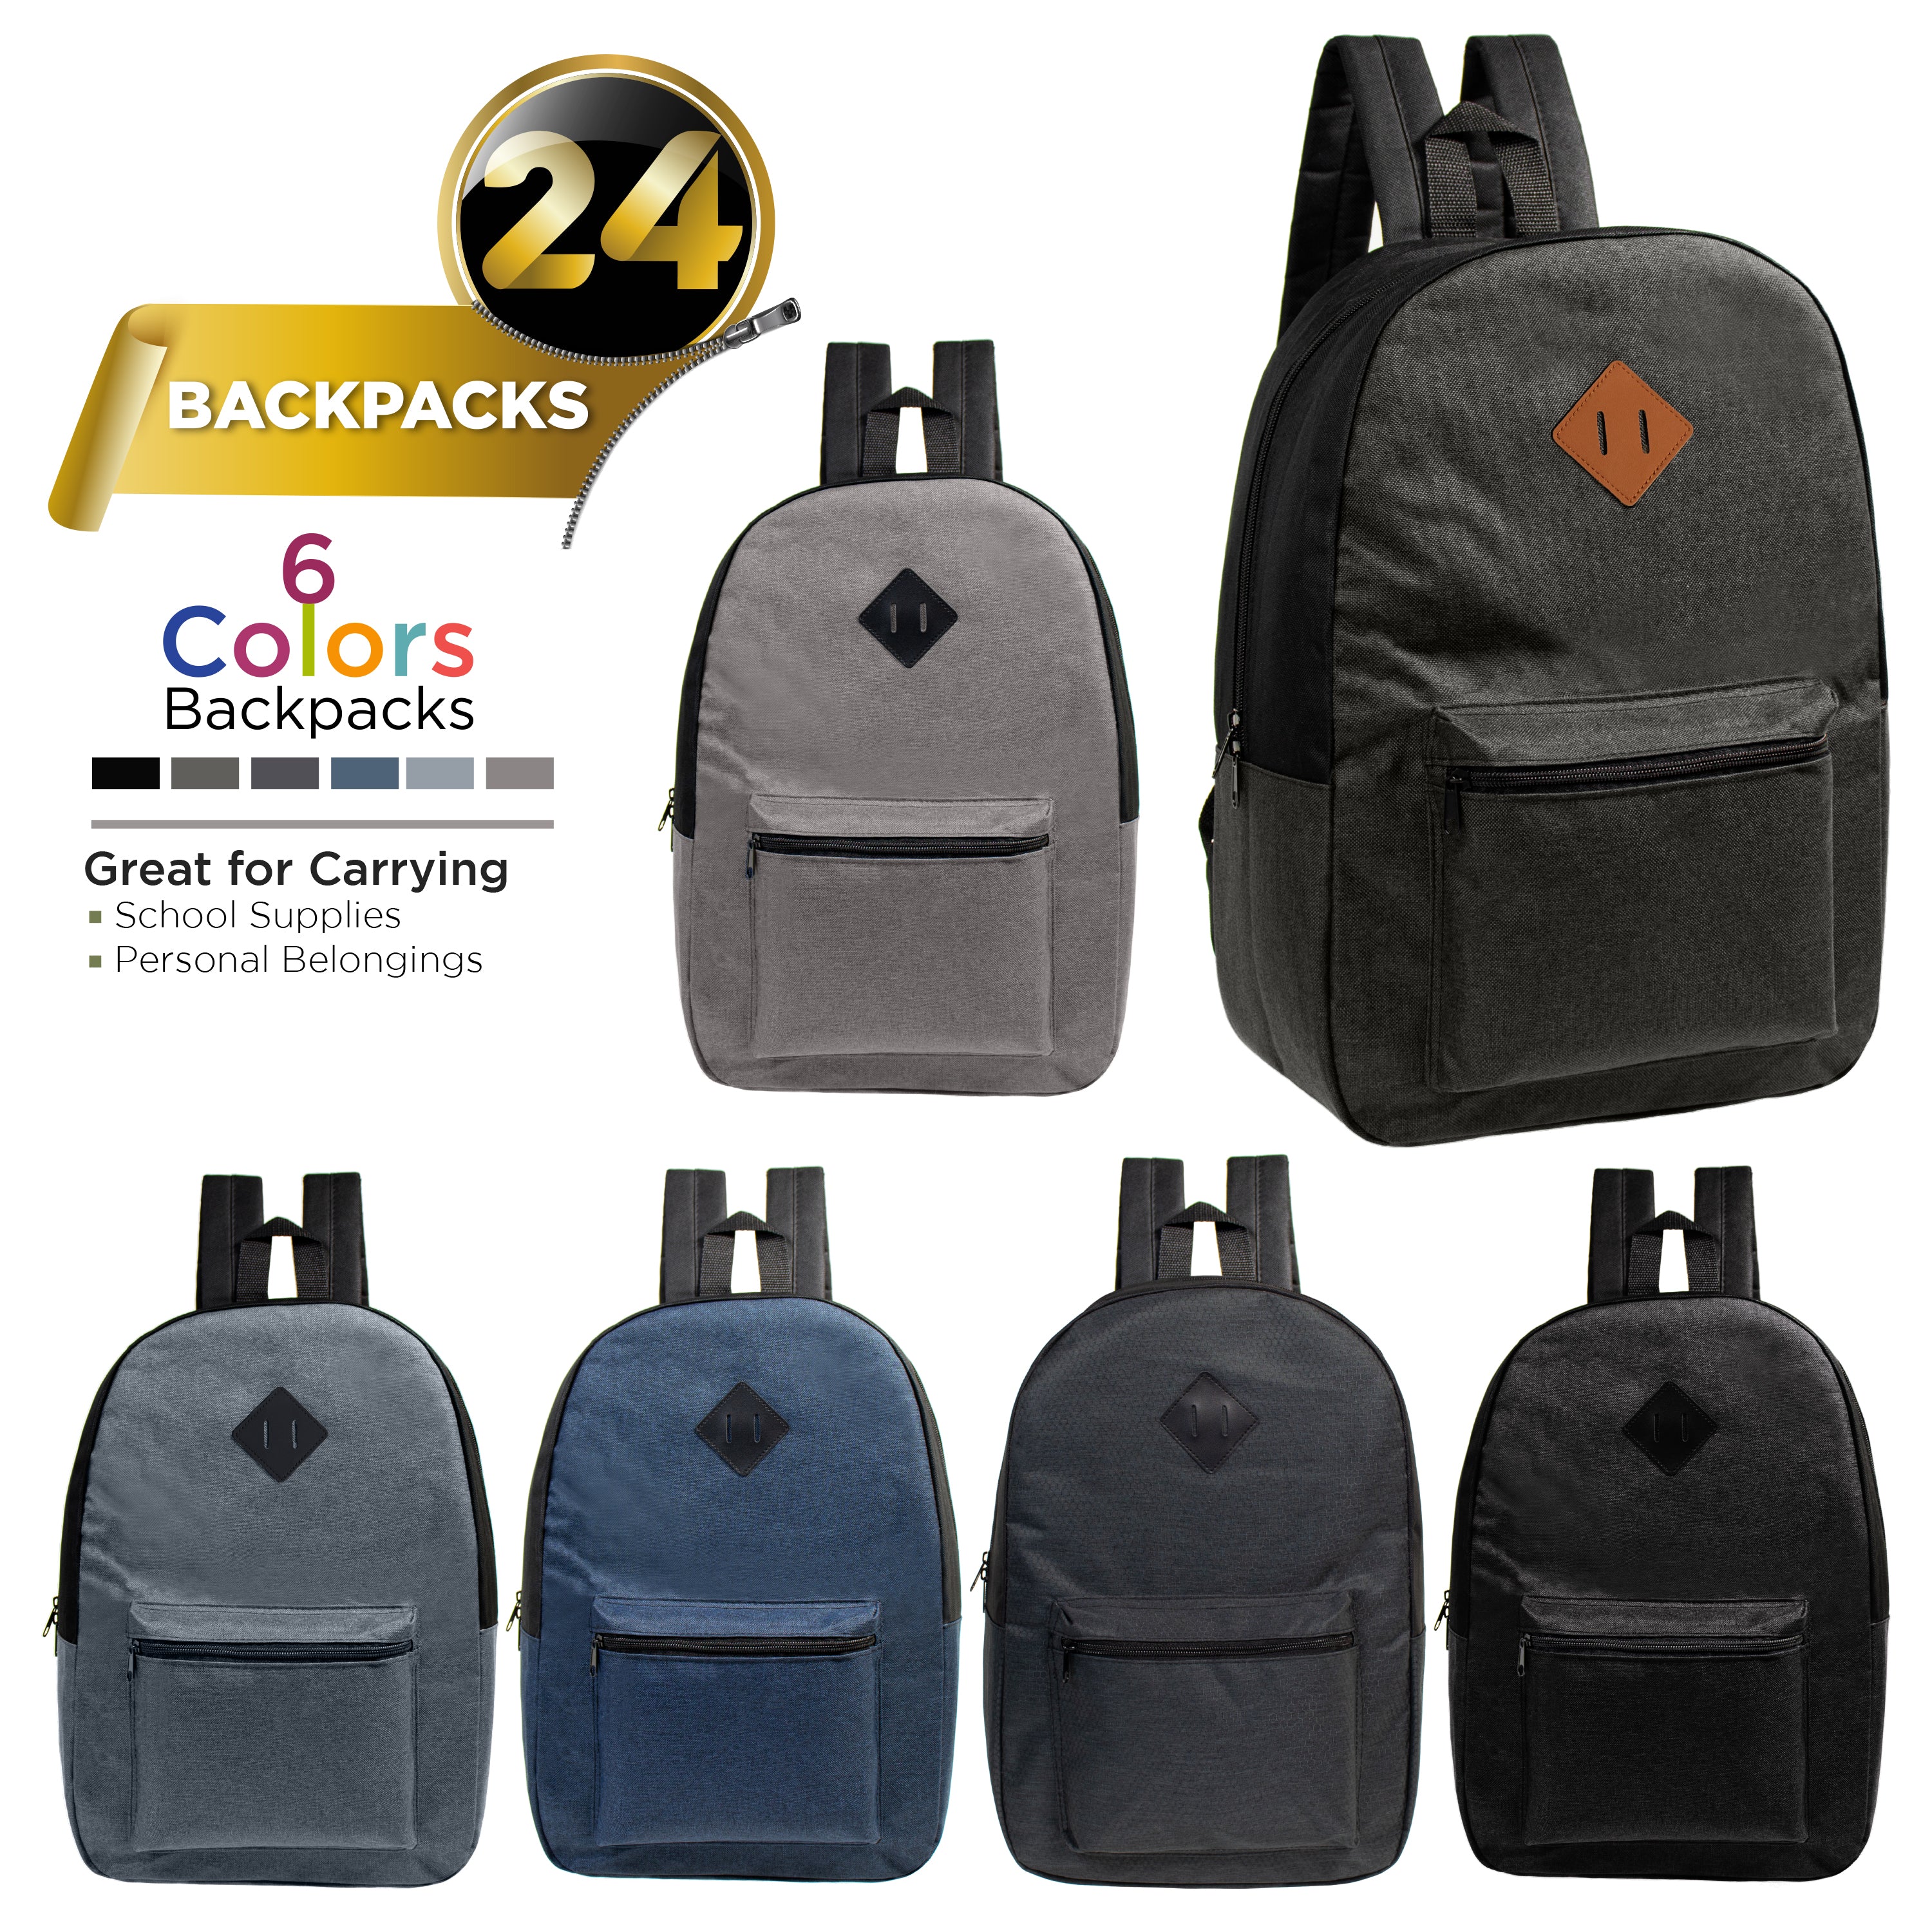 17" Kids Basic Wholesale Backpack in Assorted 6 Colors Diamond Patch - Bulk Case of 24 Backpacks